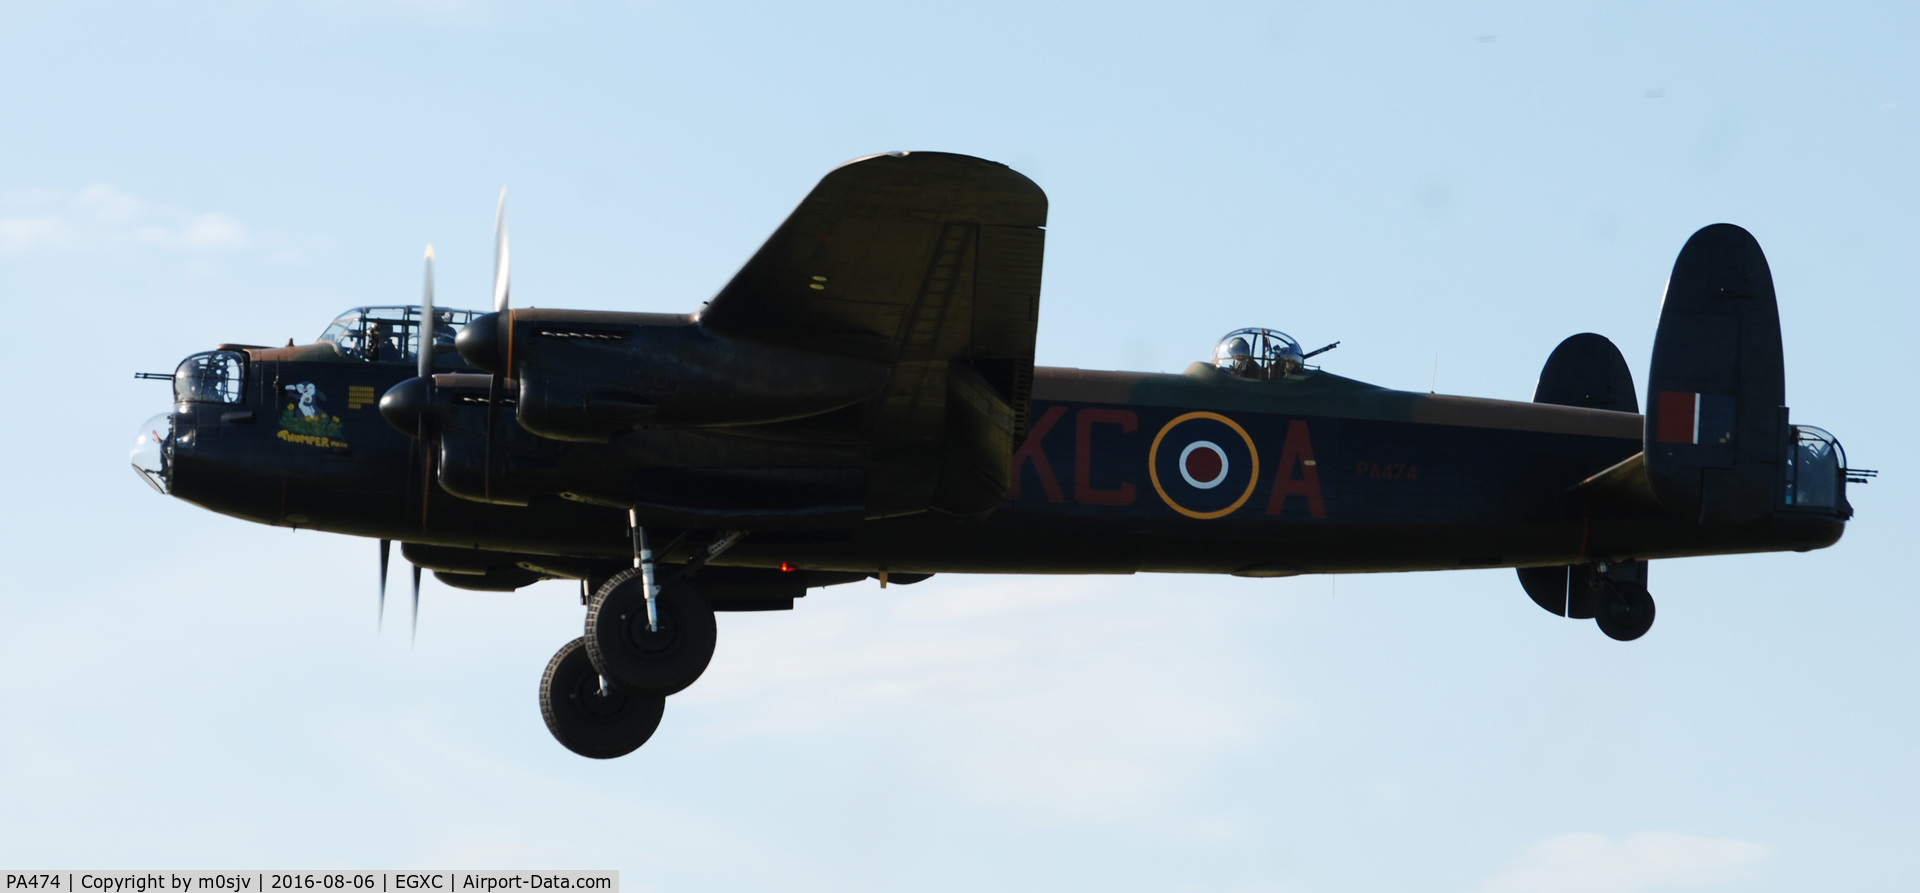 PA474, 1945 Avro 683 Lancaster B1 C/N VACH0052/D2973, Thumper on Finals at Coningsby